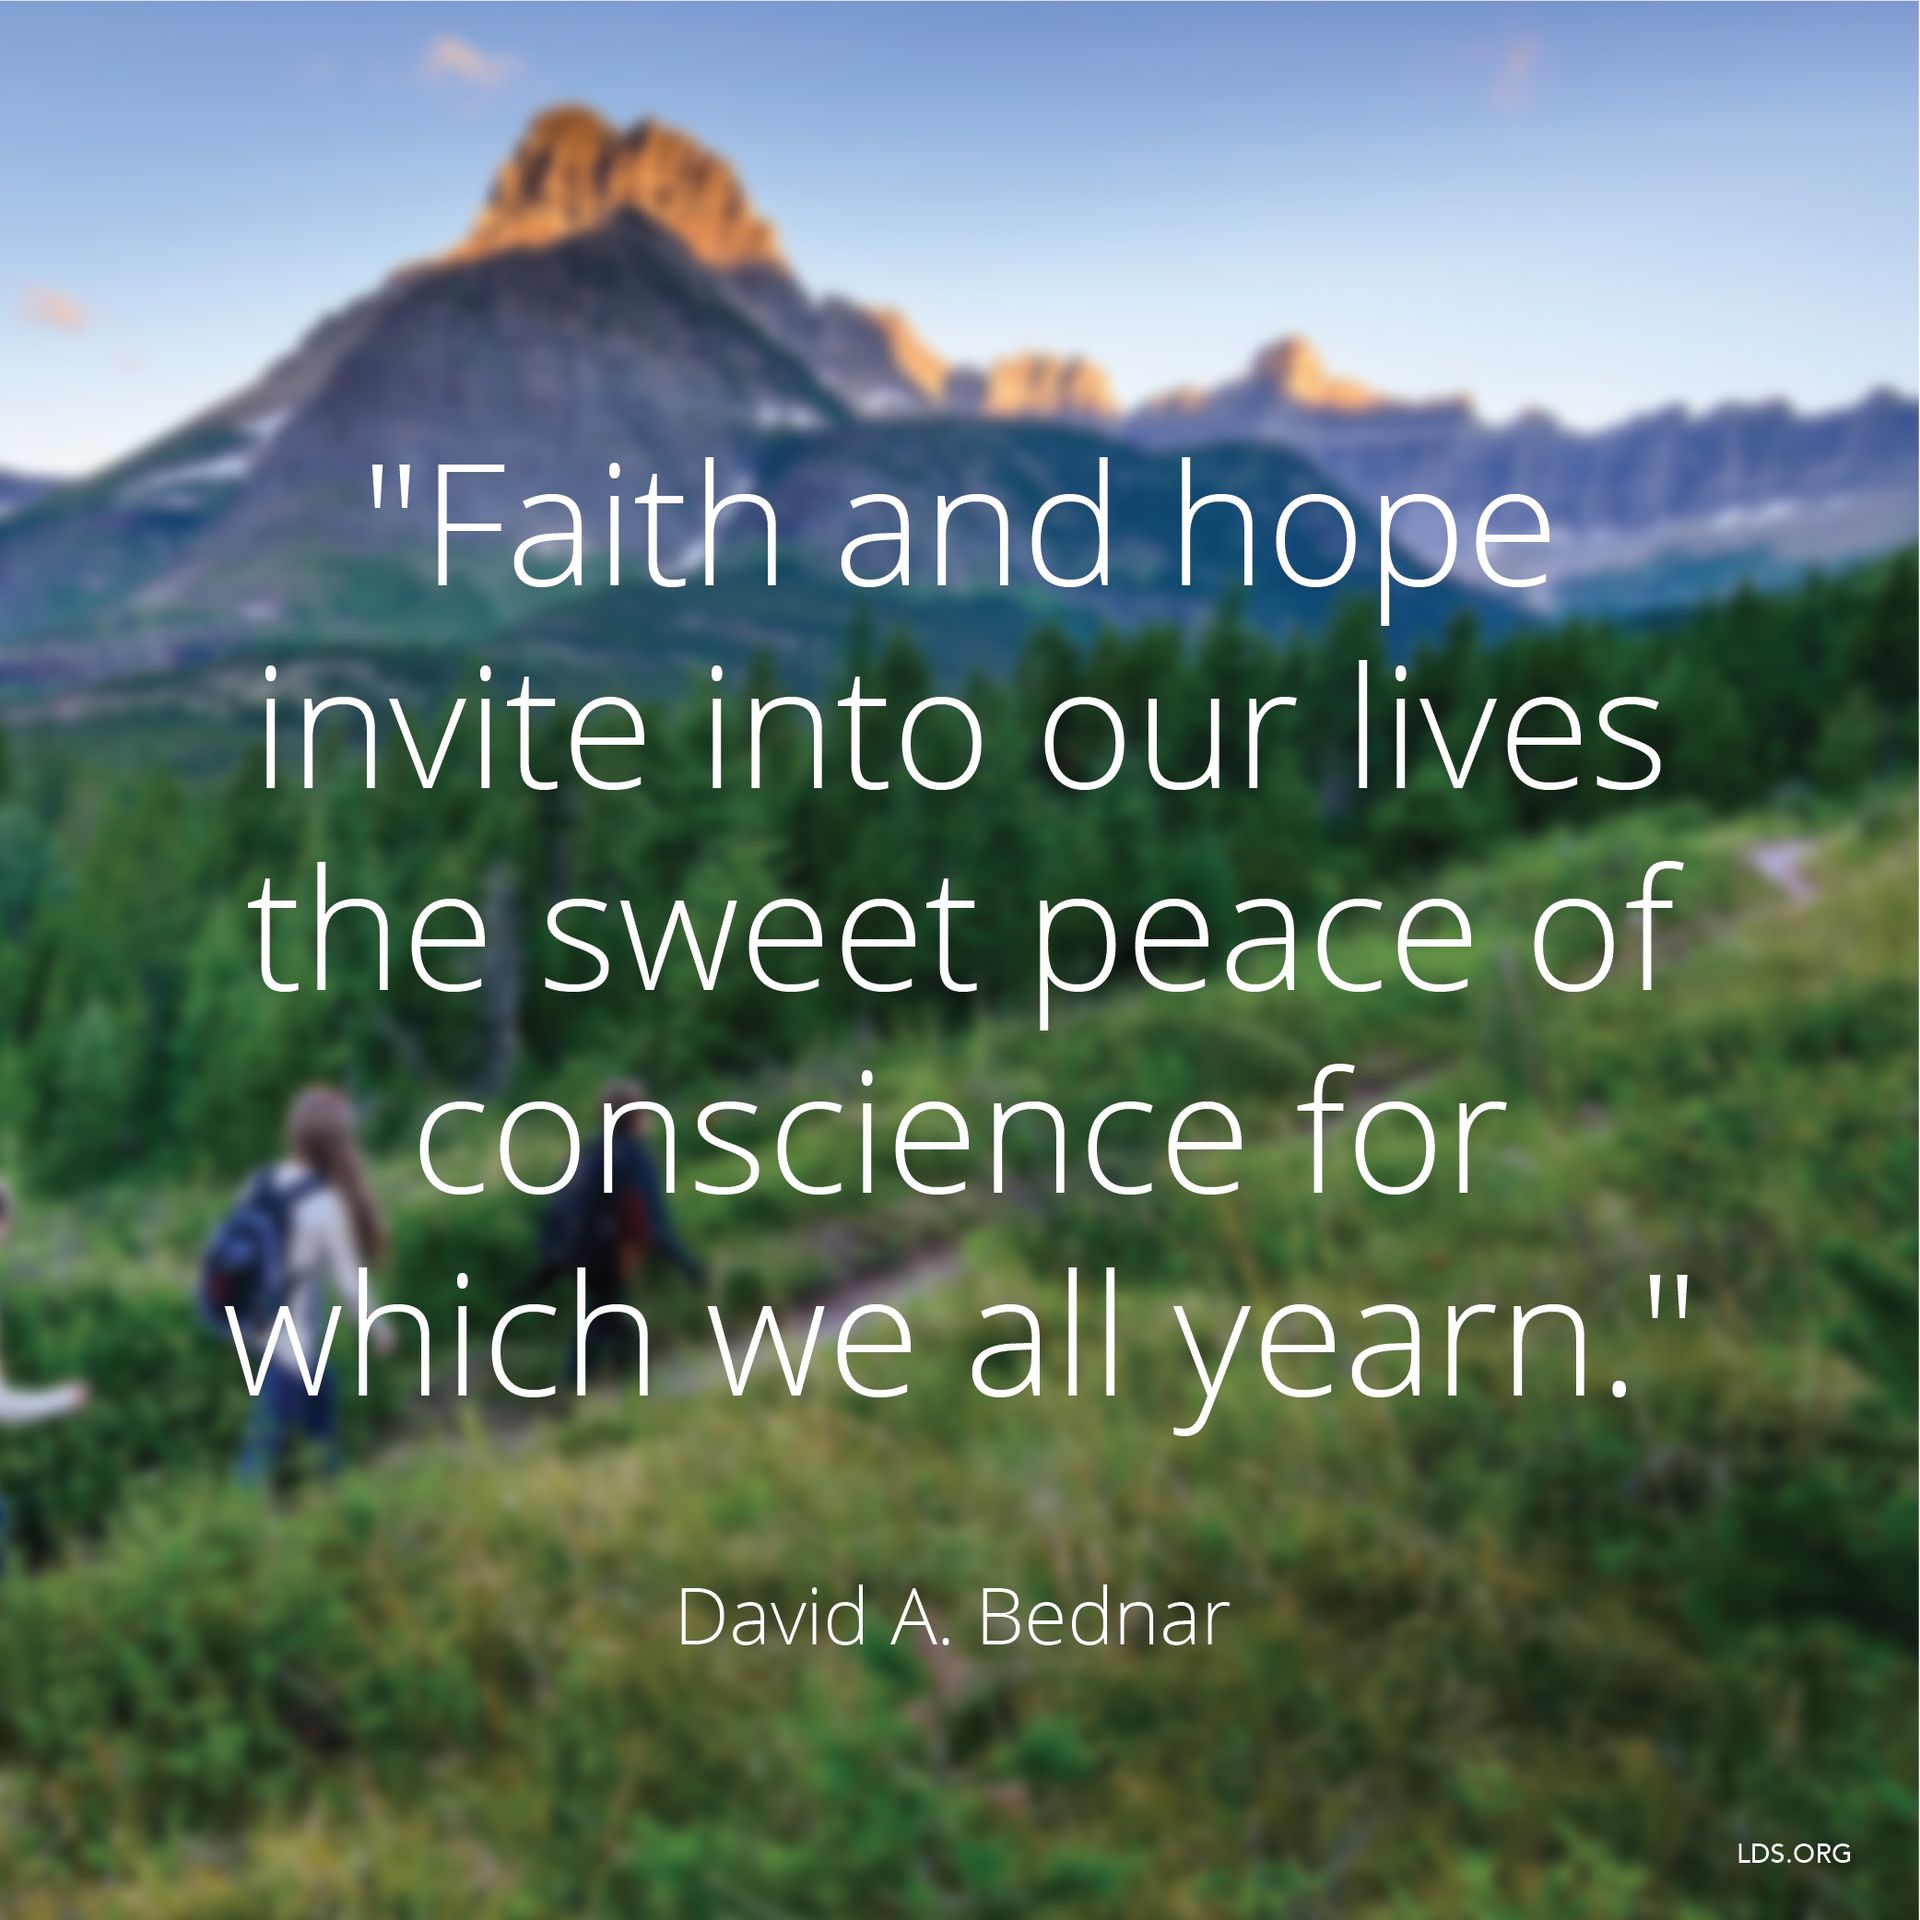 “Faith and hope invite into our lives the sweet peace of conscience for which we all yearn.”—Elder David A. Bednar, “Therefore They Hushed Their Fears” © undefined ipCode 1.